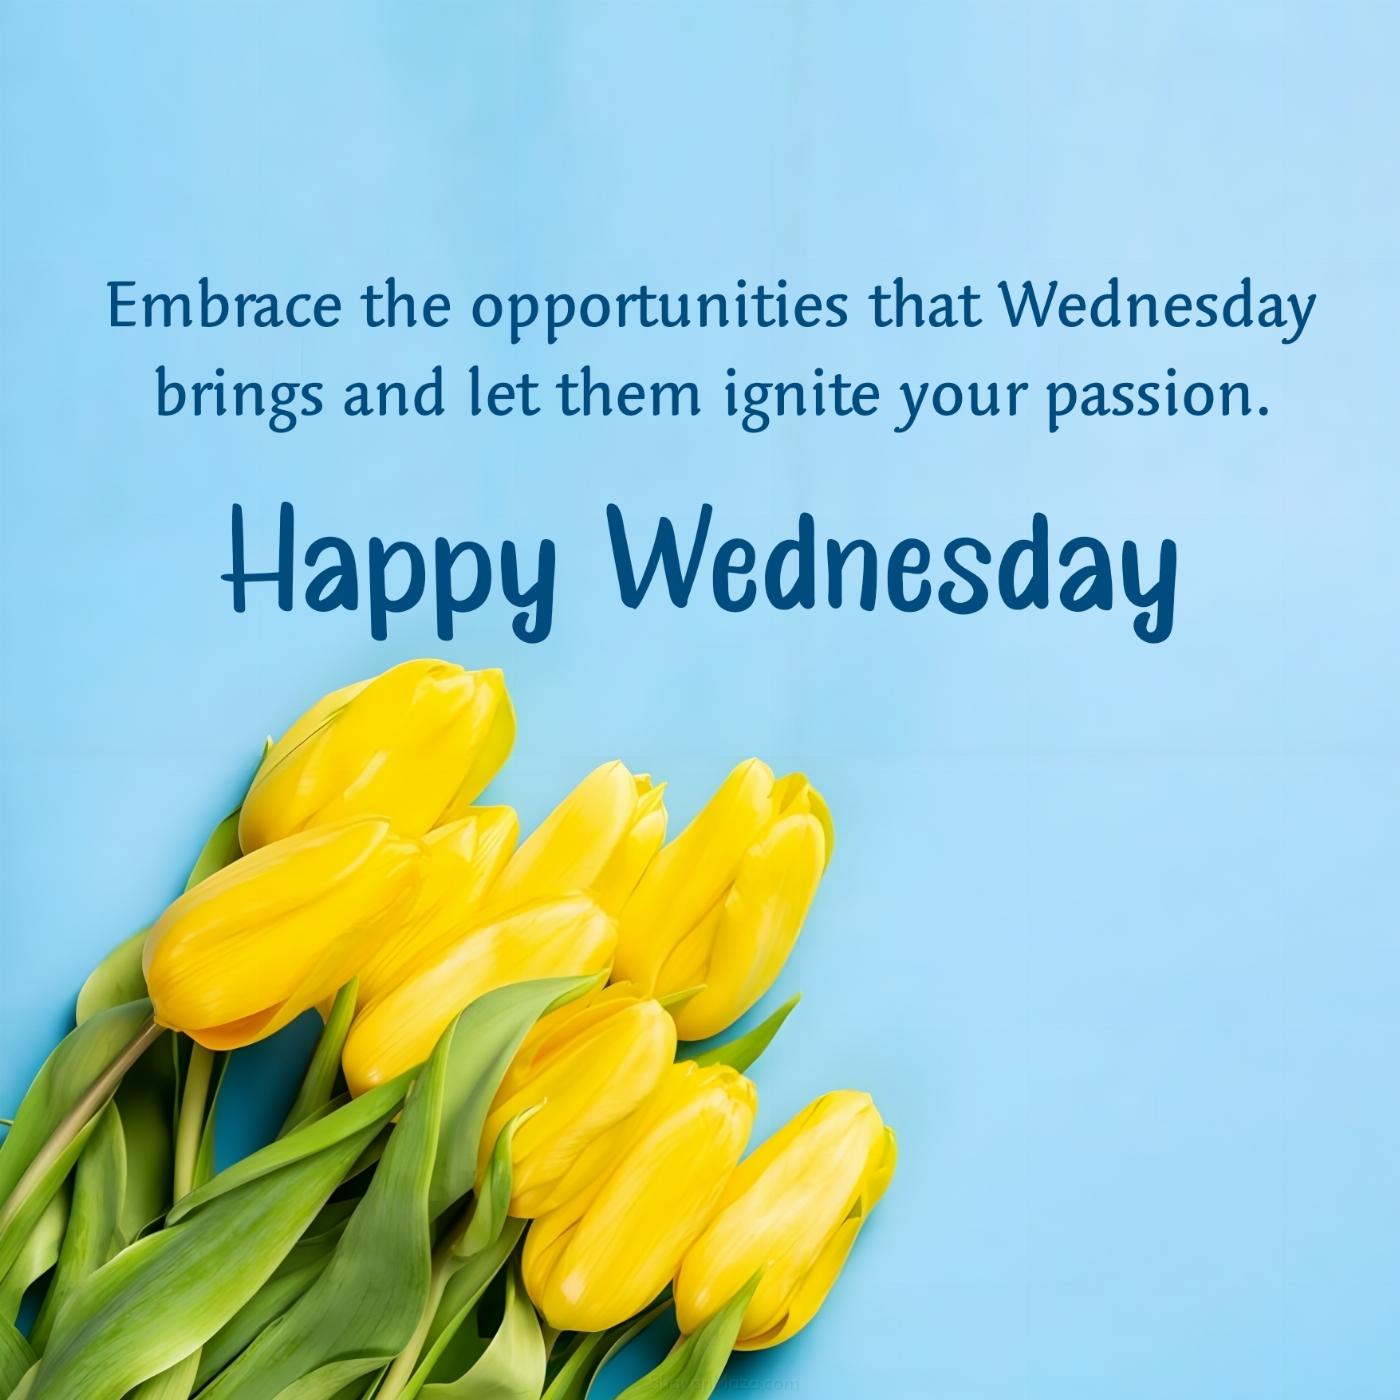 Embrace the opportunities that Wednesday brings and let them ignite your passion